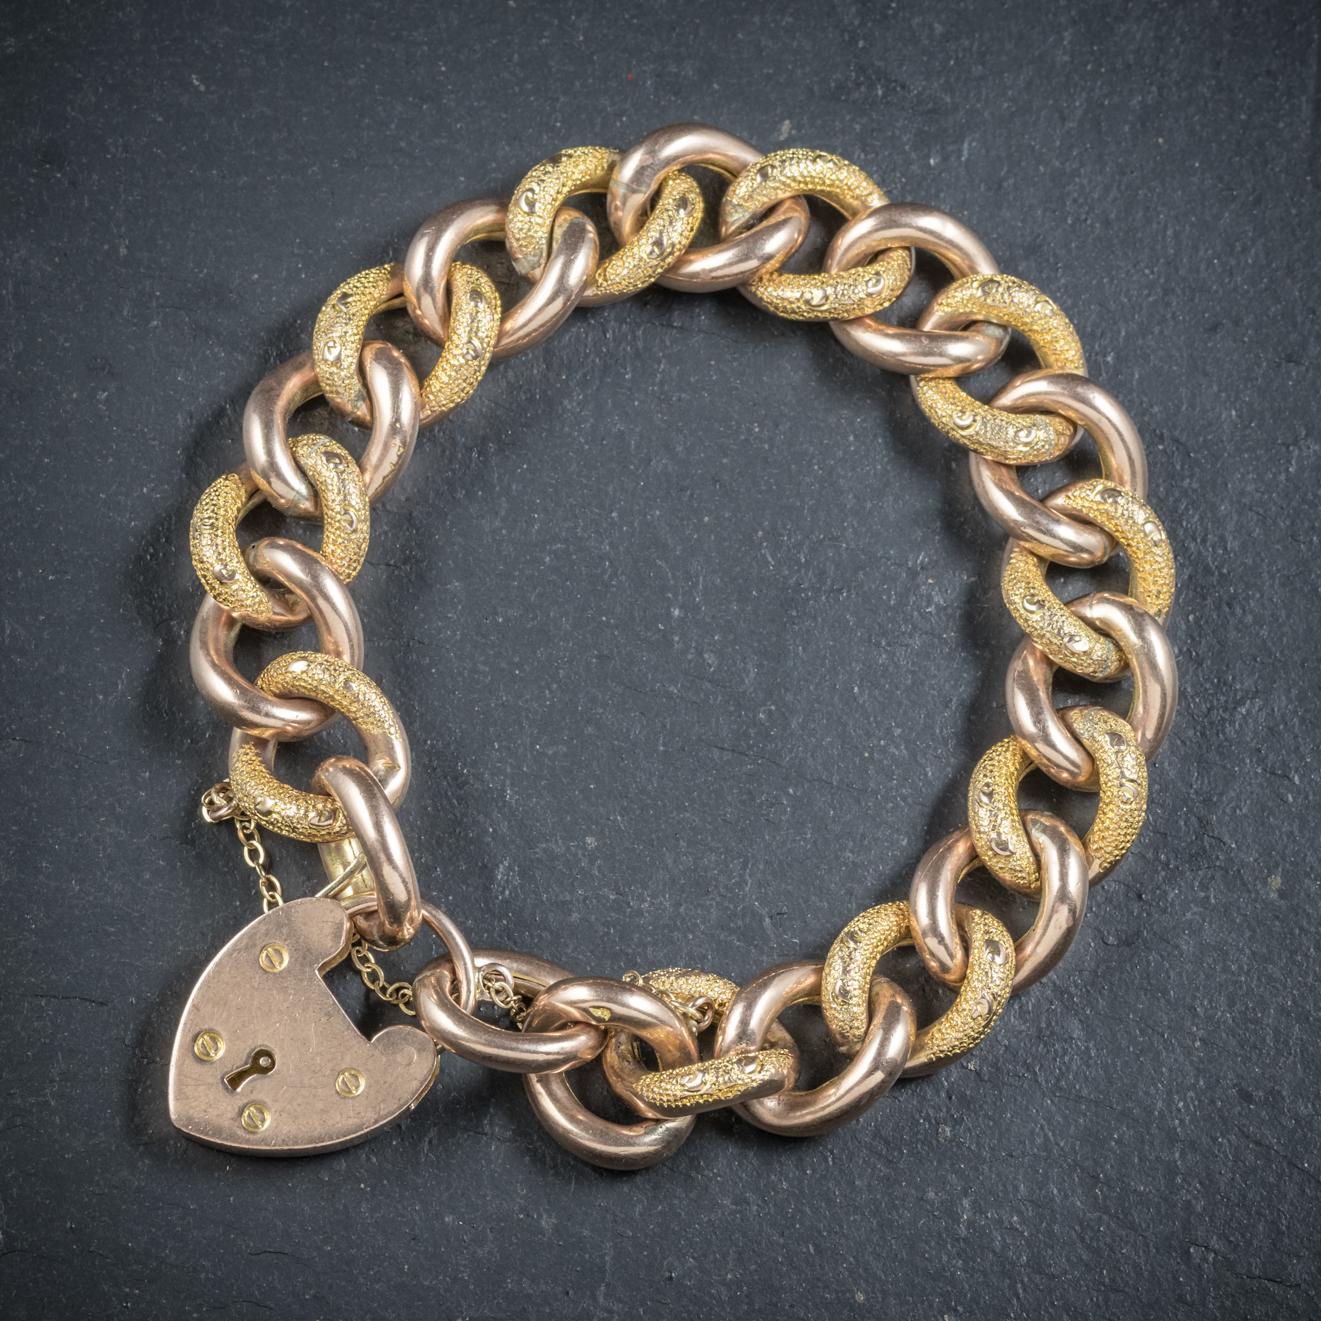 This lovely 9ct Yellow Gold curb bracelet is Victorian Circa 1900

The piece consists of chased/ plain links which are stamped 9ct underneath and have turned a lovely rosy hue with age

Held together by a fabulous heart Padlock which is hallmarked